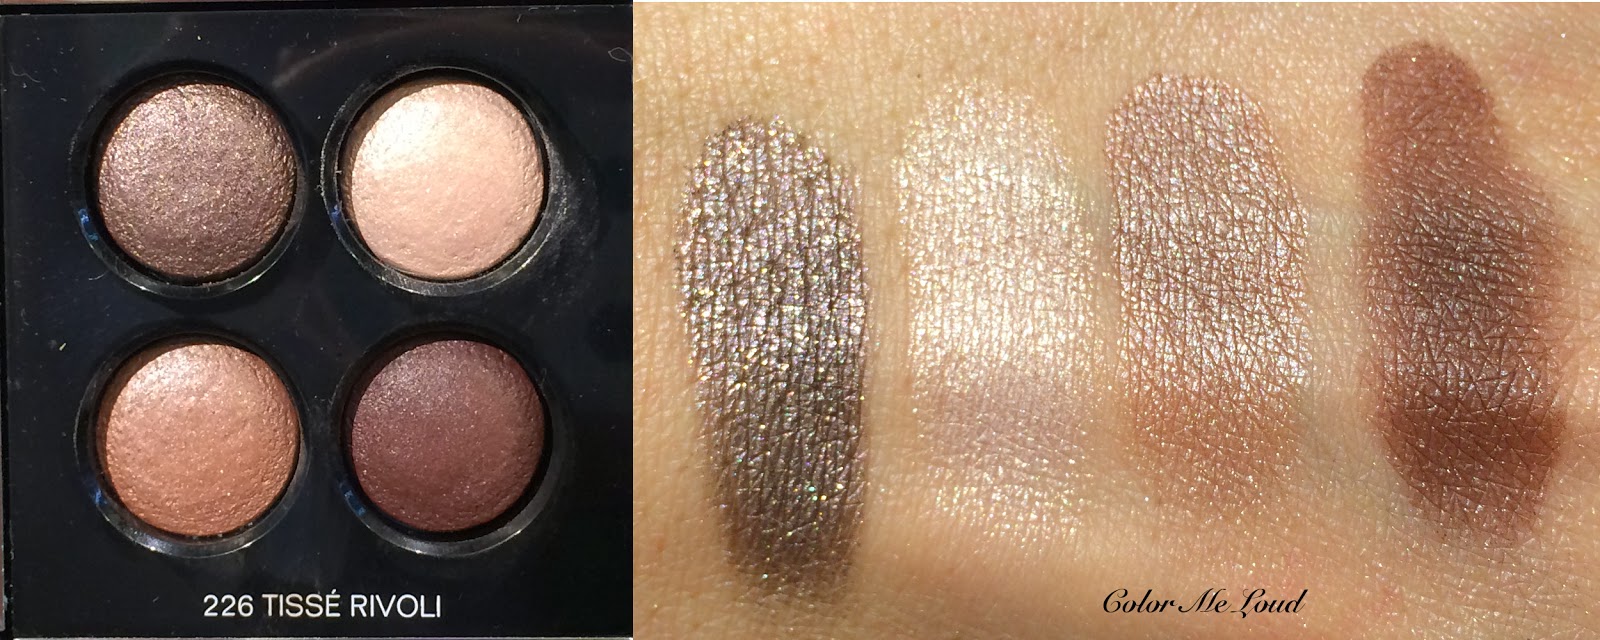 Get a Luminous Eye Look with LES 4 OMBRES from the HOLIDAY 2019